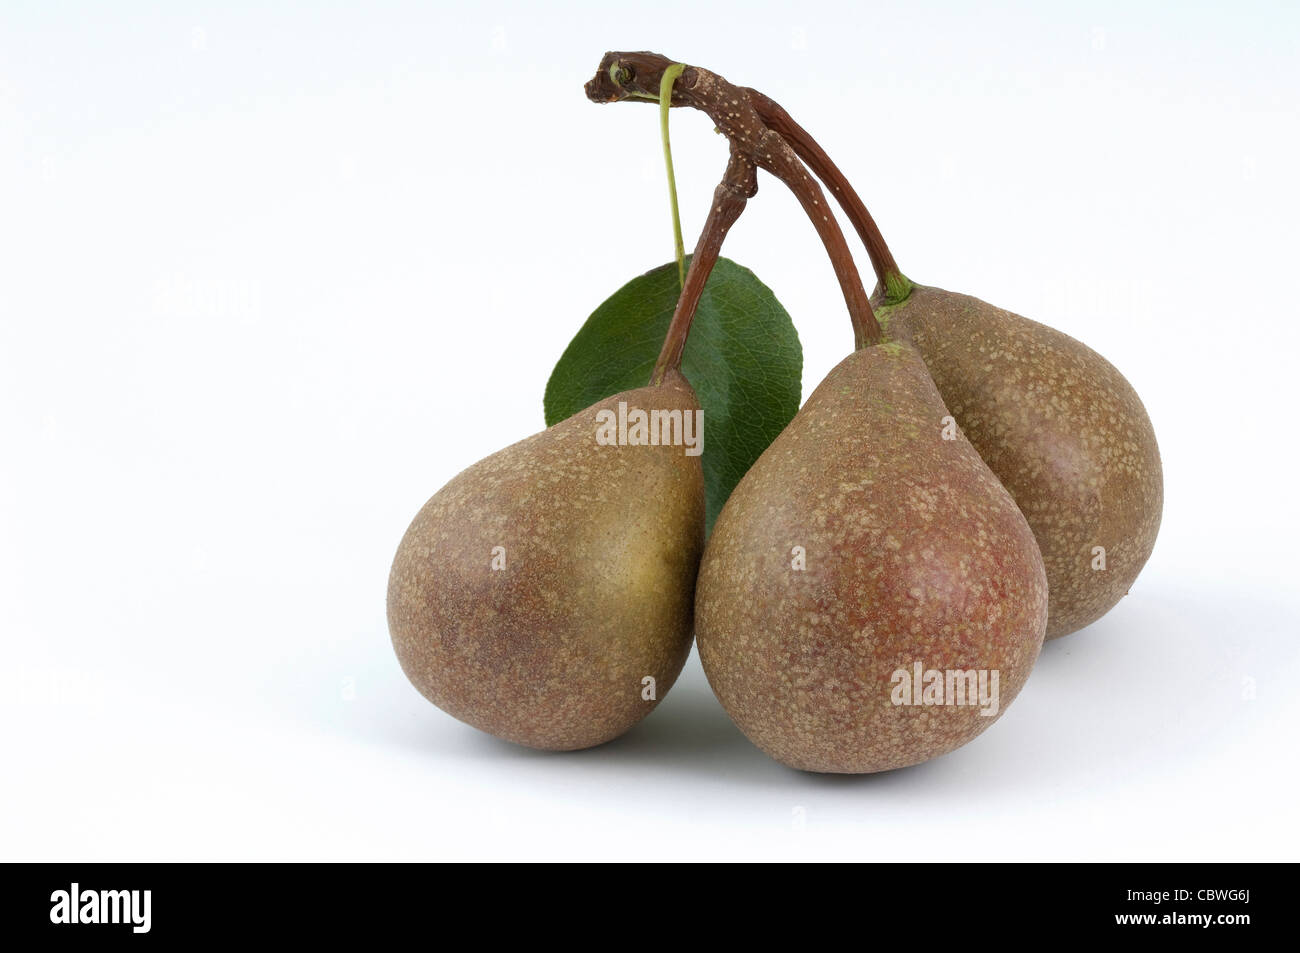 Common Pear, European Pear (Pyrus communis), variety: Gute Graue, fruit with leaf, studio picture. Stock Photo